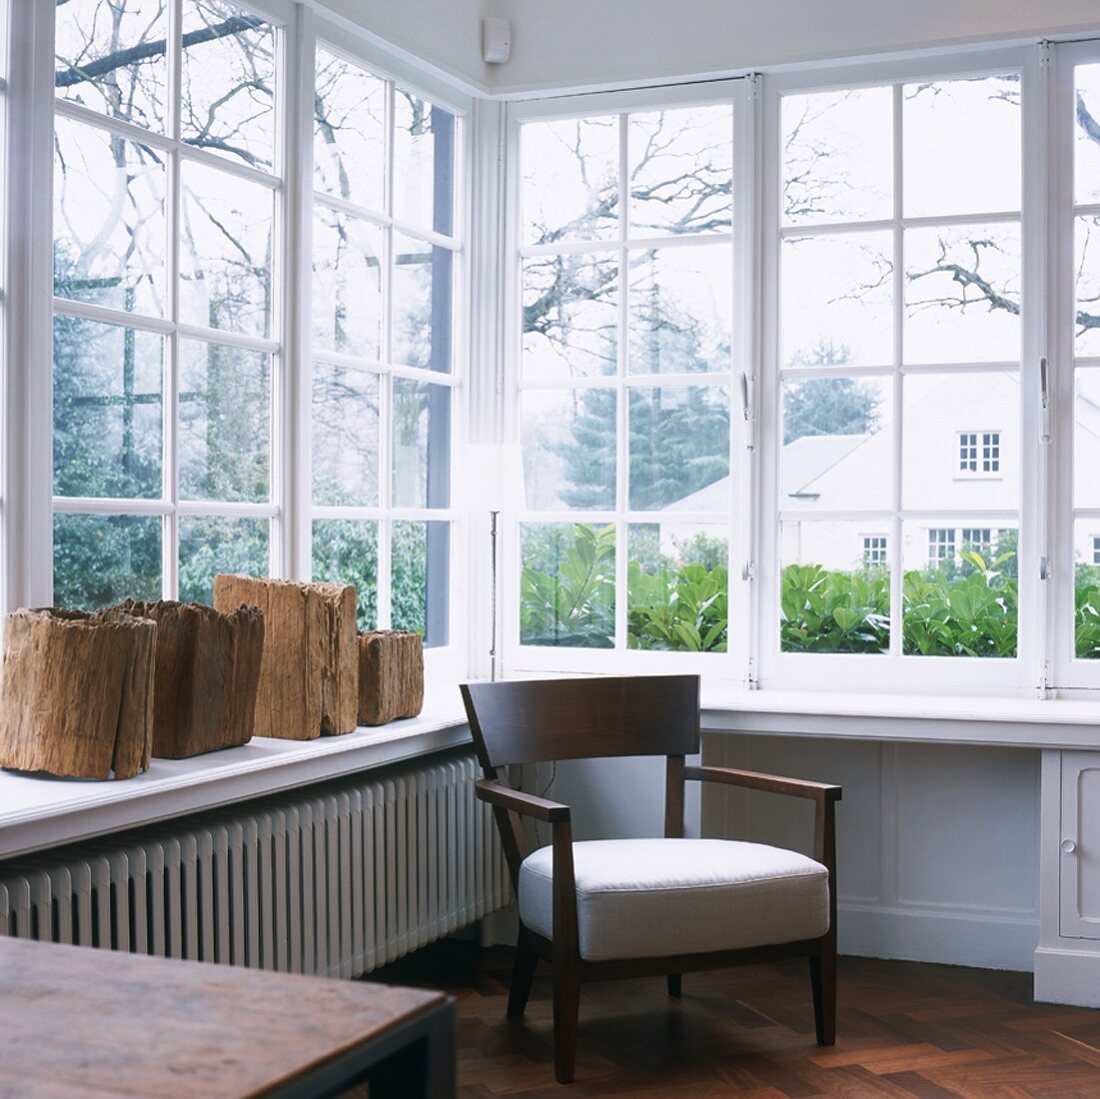 Upholstered wooden chair below conservatory windows with rough chunks of wood on windowsill